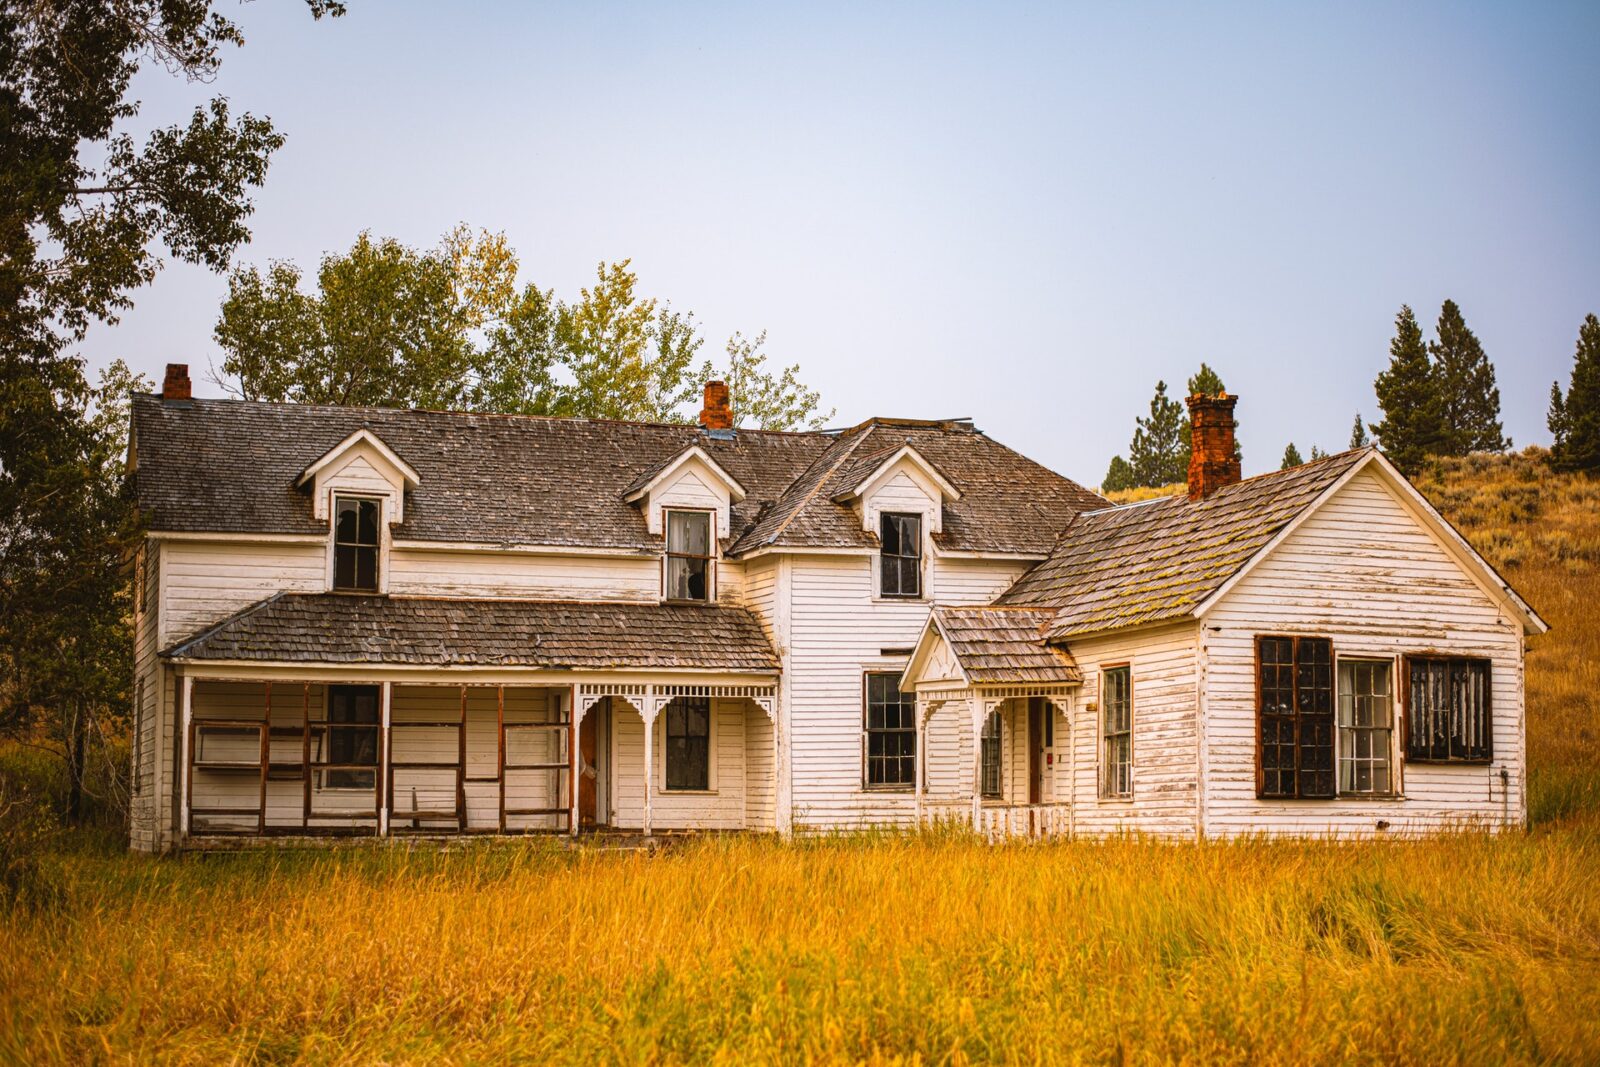 How To Buy Abandoned Homes With No Money